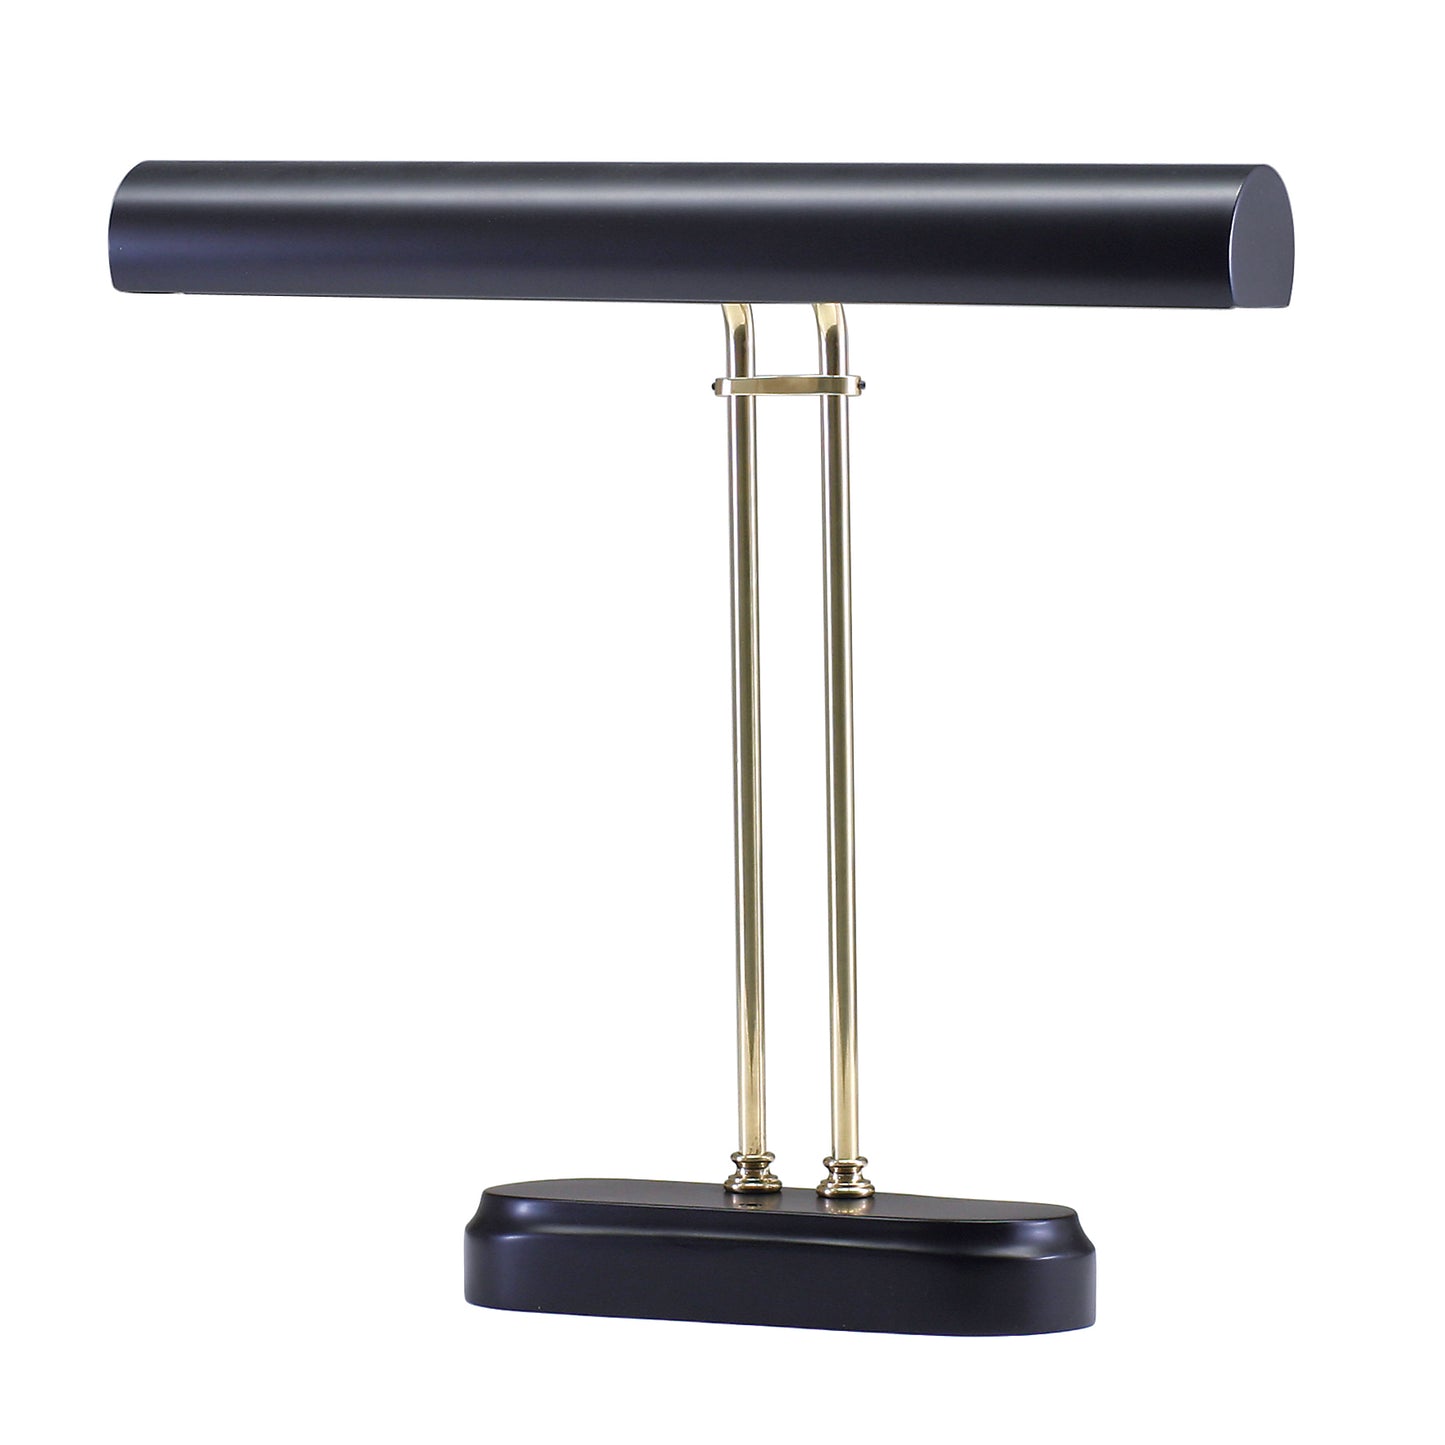 House of Troy Digital Piano Lamp 16" Black Polished Brass Accents P16-D02-617